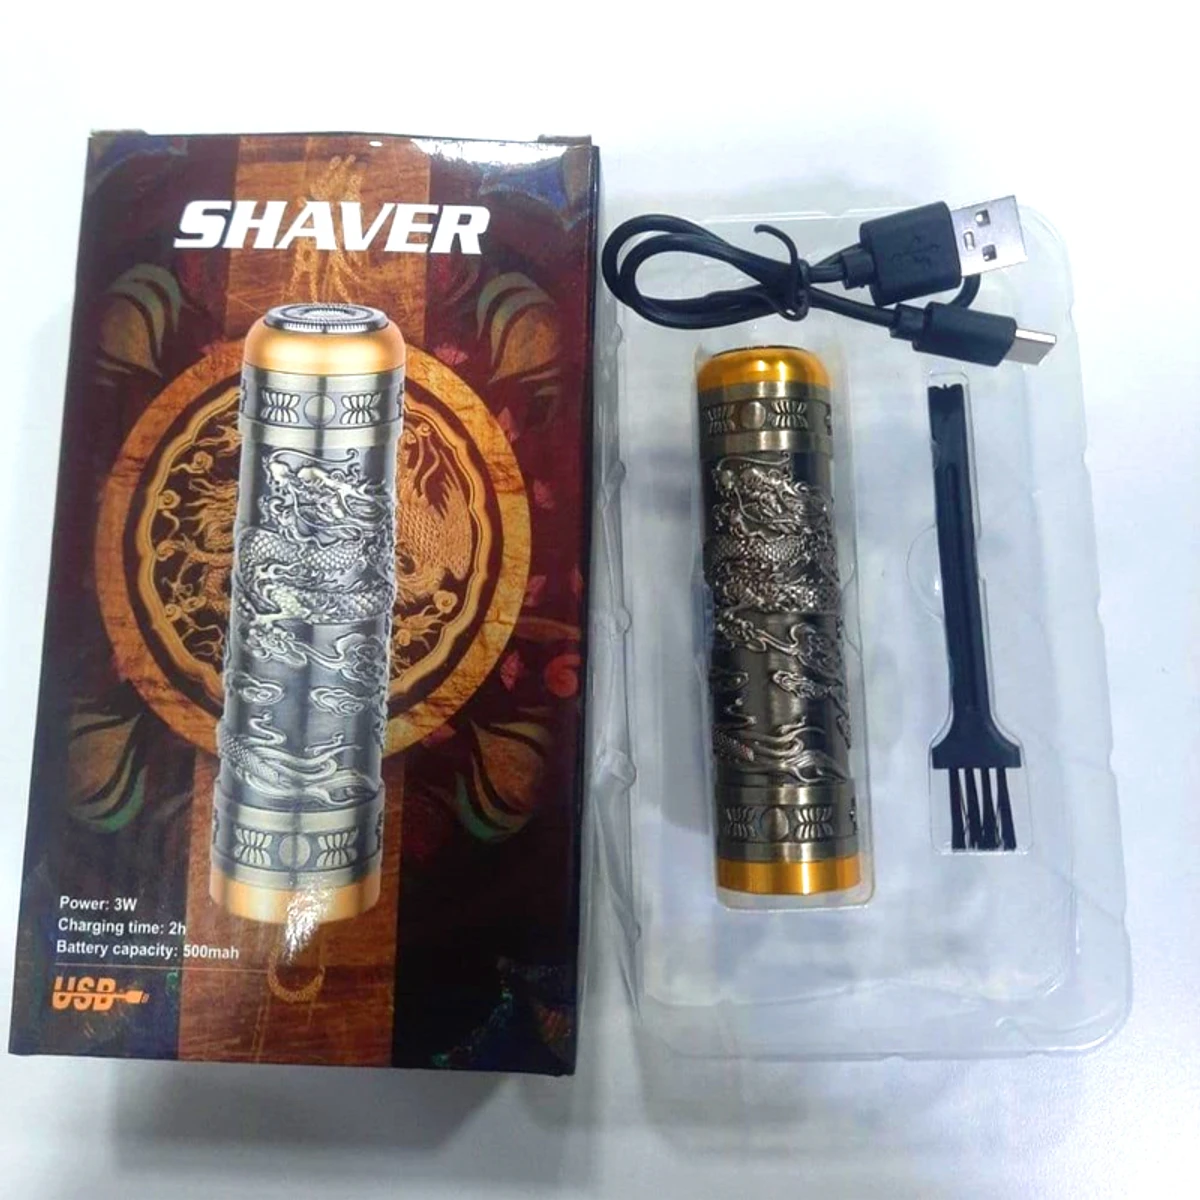 Maxtop Professional Shaver